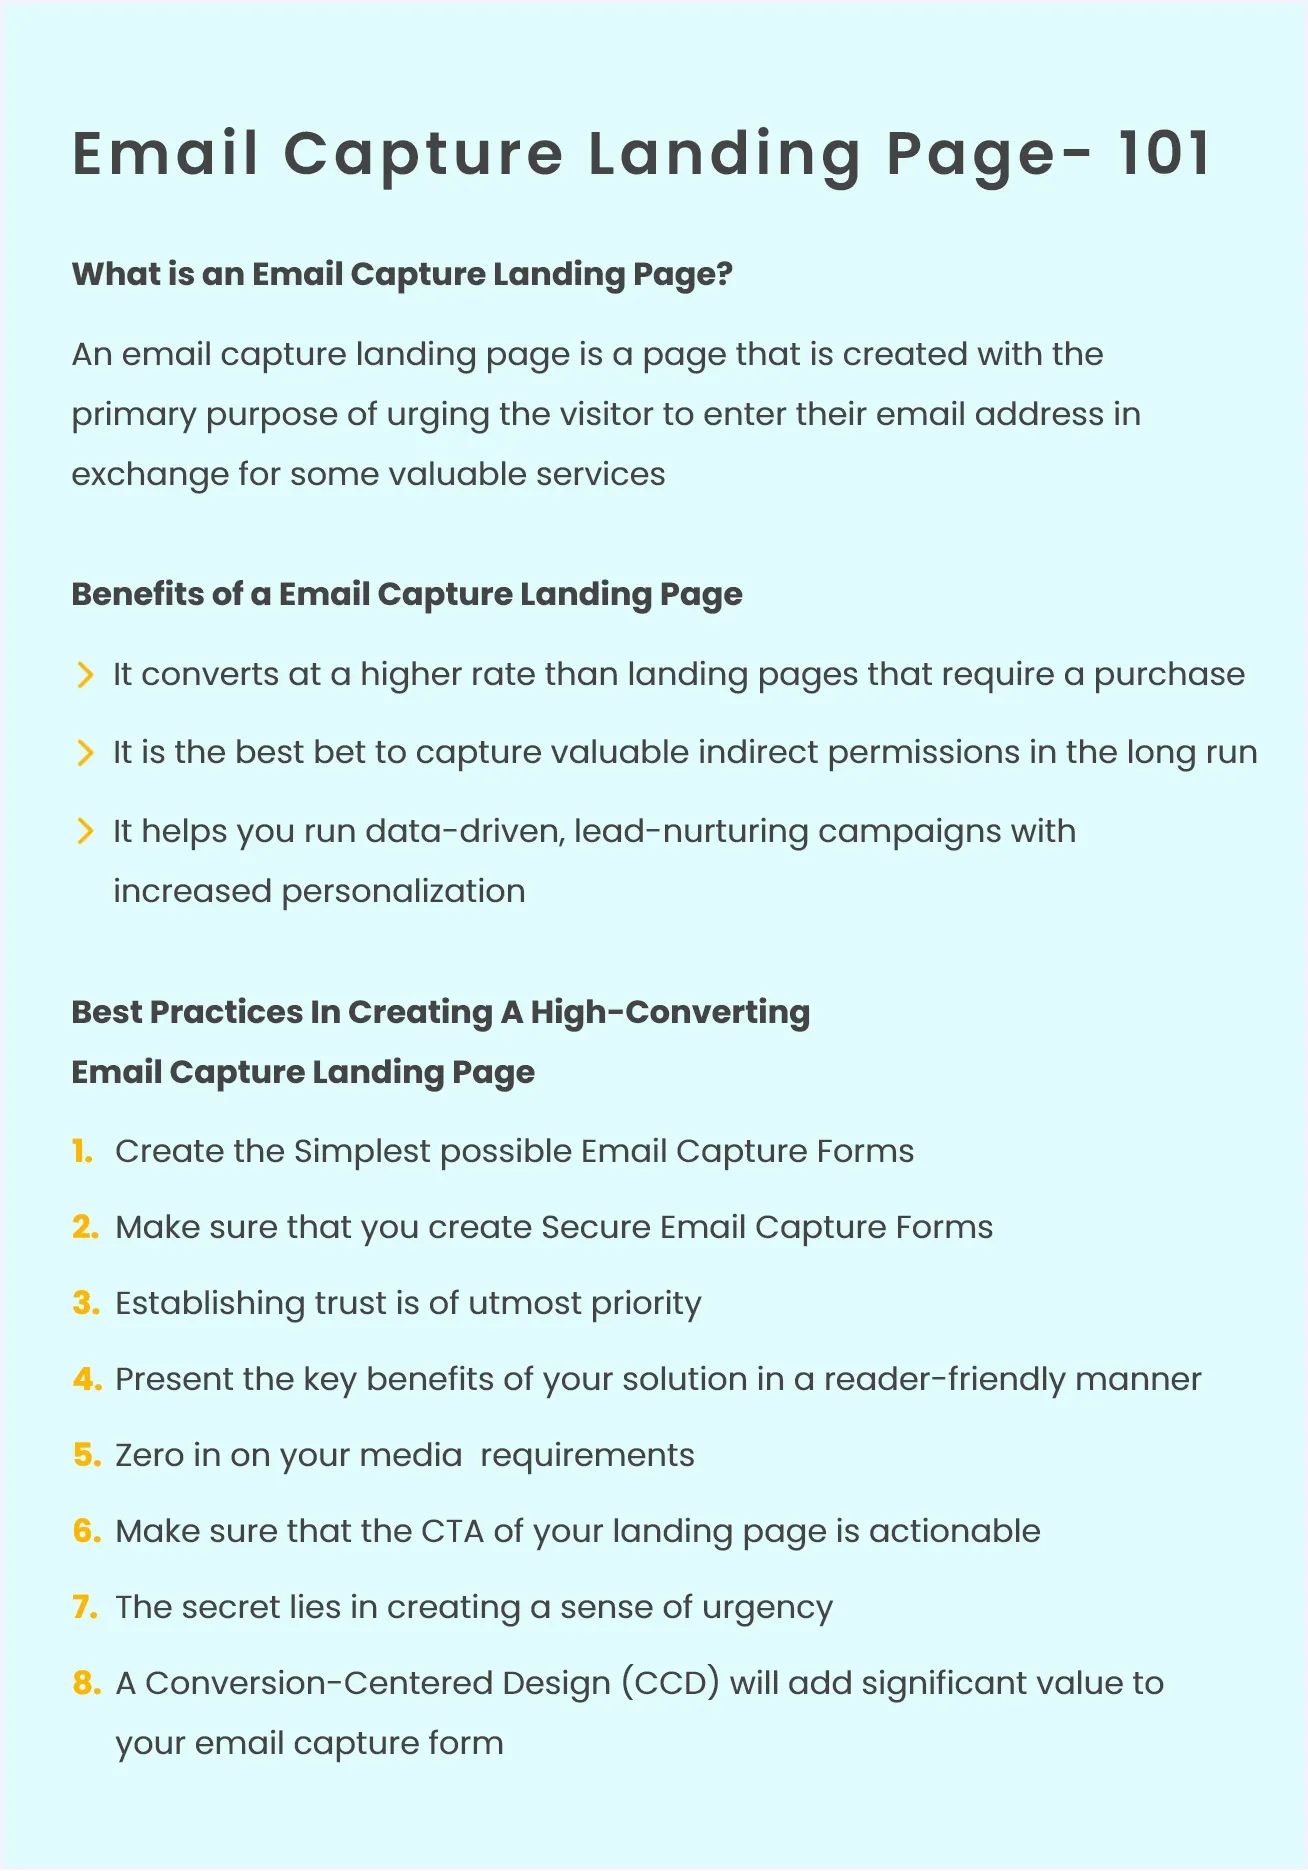 email-capture-landing-page-summary